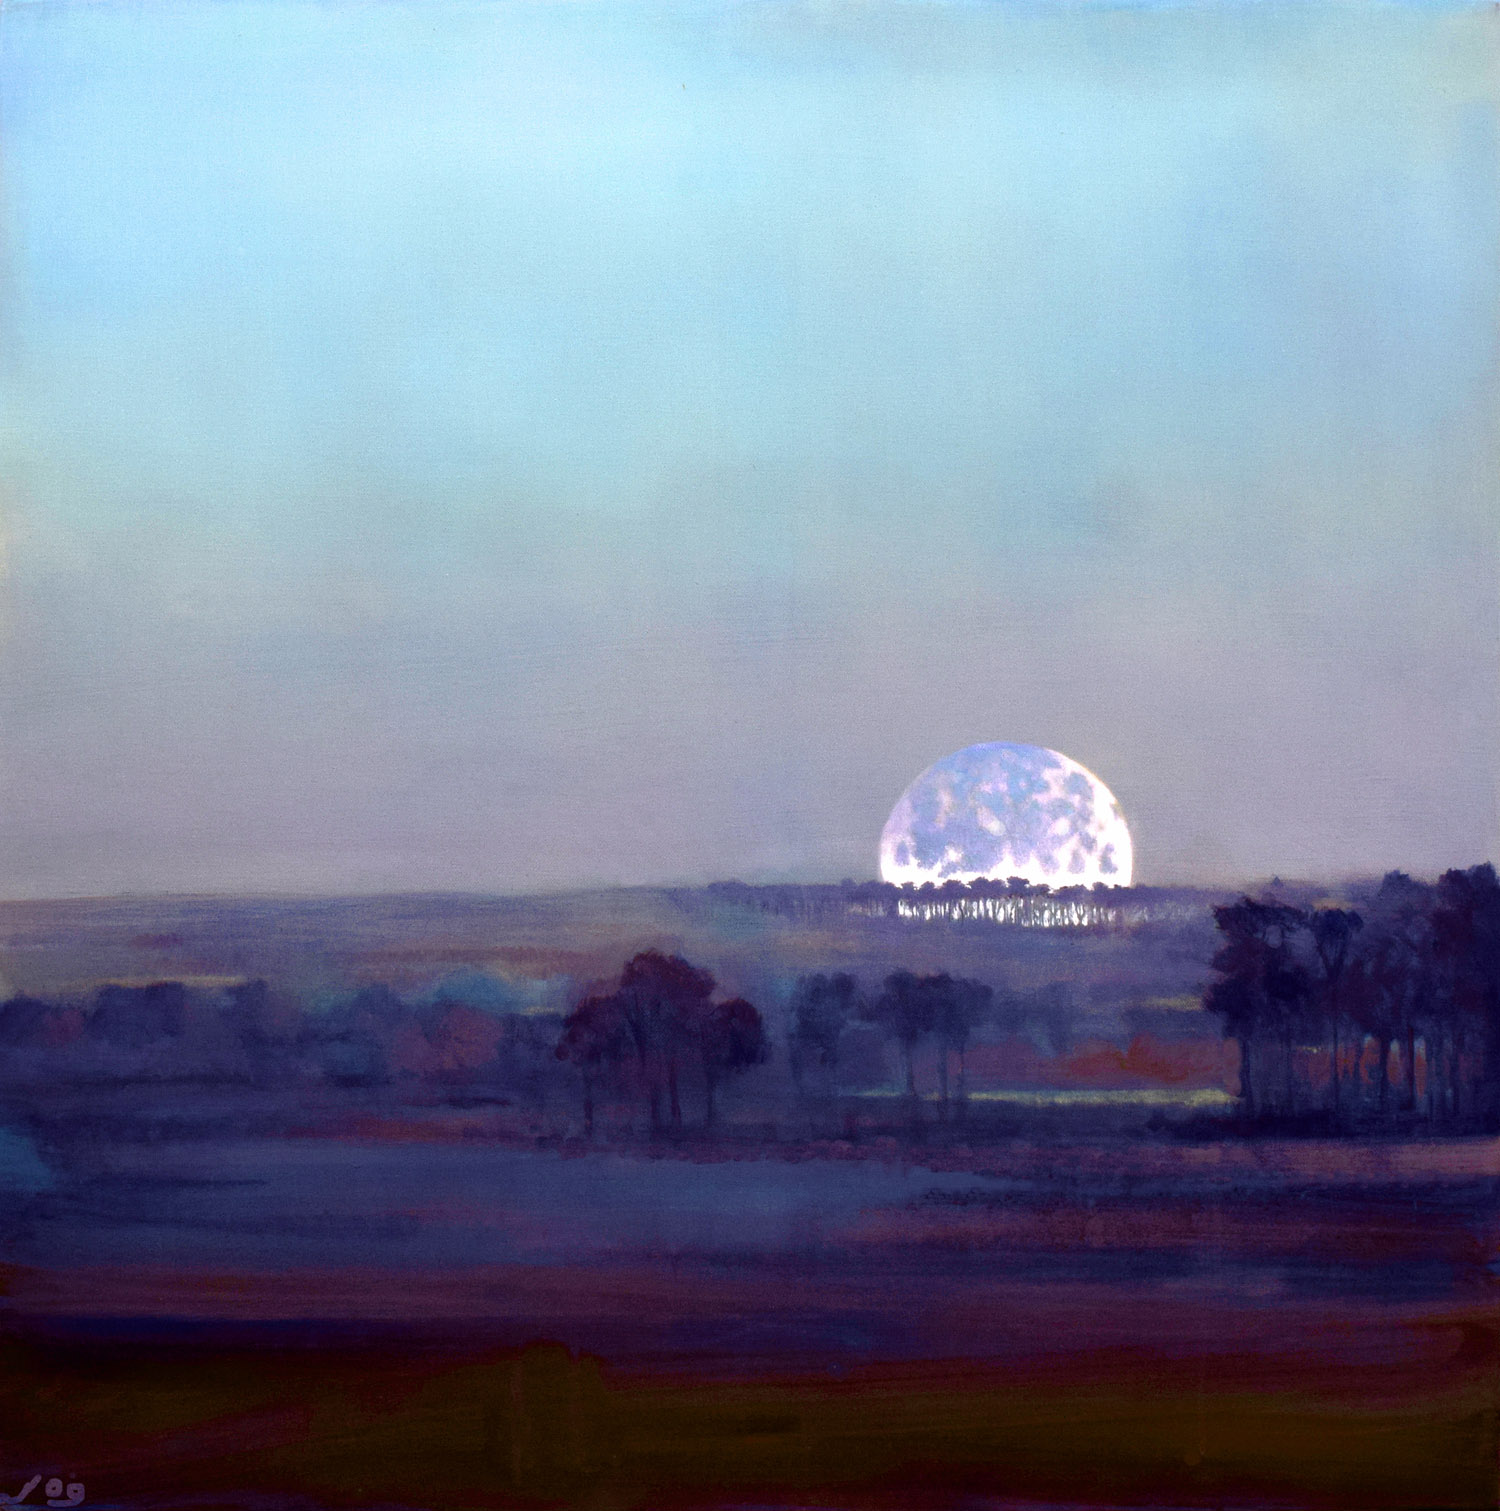 Saint Hippolyte at Dusk by John O'Grady | Contemporaray painting of twilight in Provence when the moon rises above the crest of the hill lined with pines